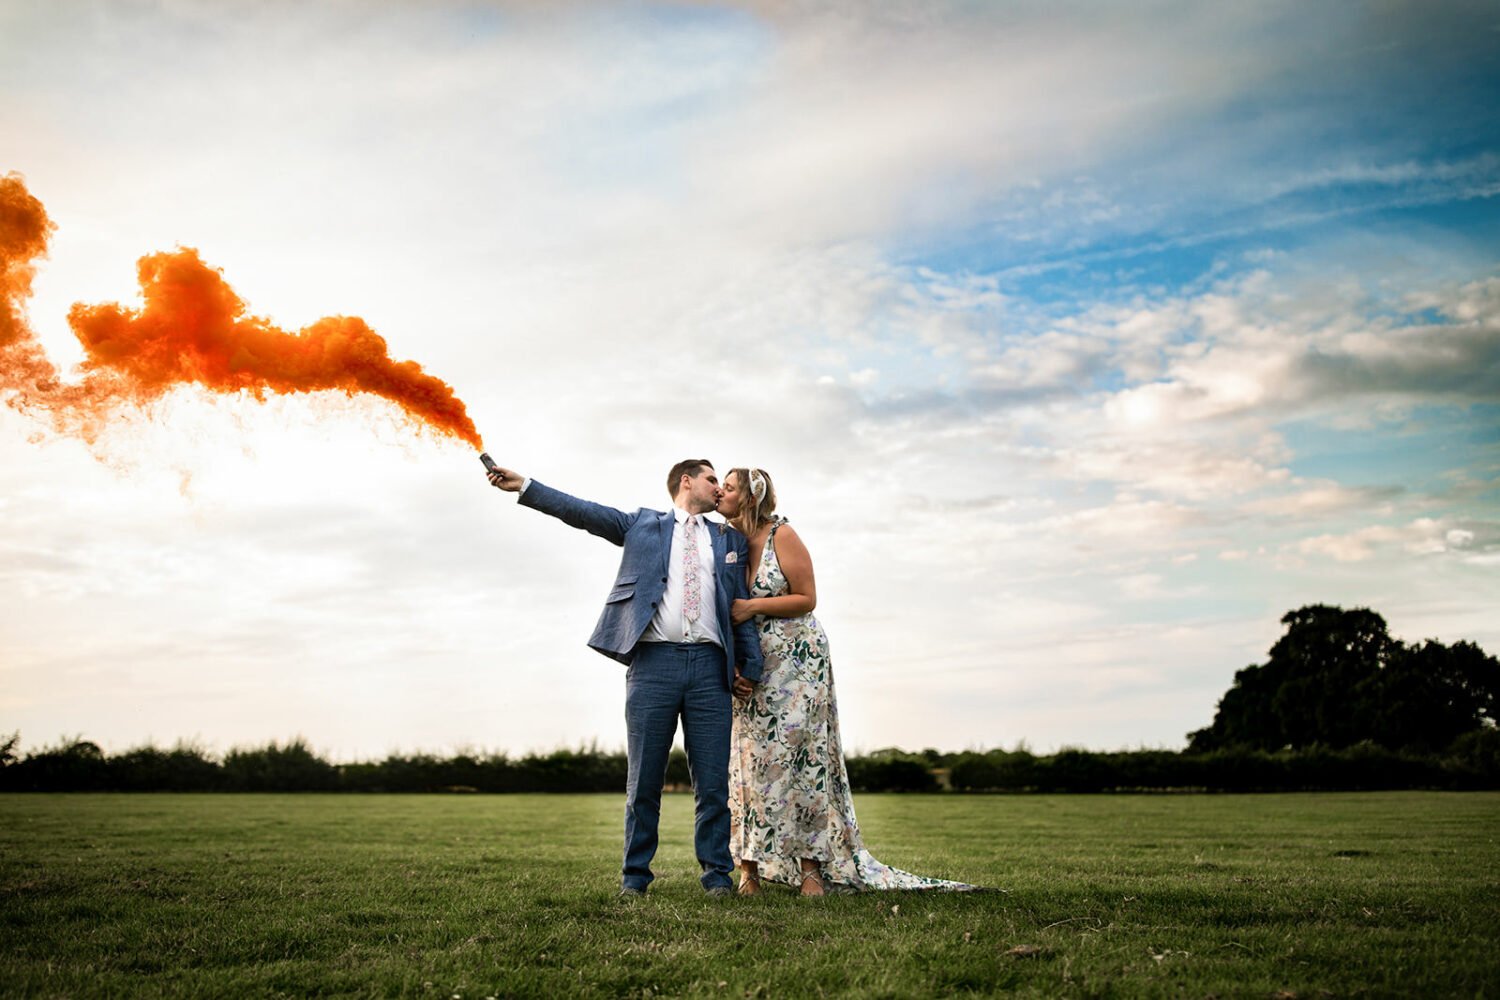 Couple have a wedding portrait in a field in norfolk the groom is holding an orange smoke bomb as they kiss
